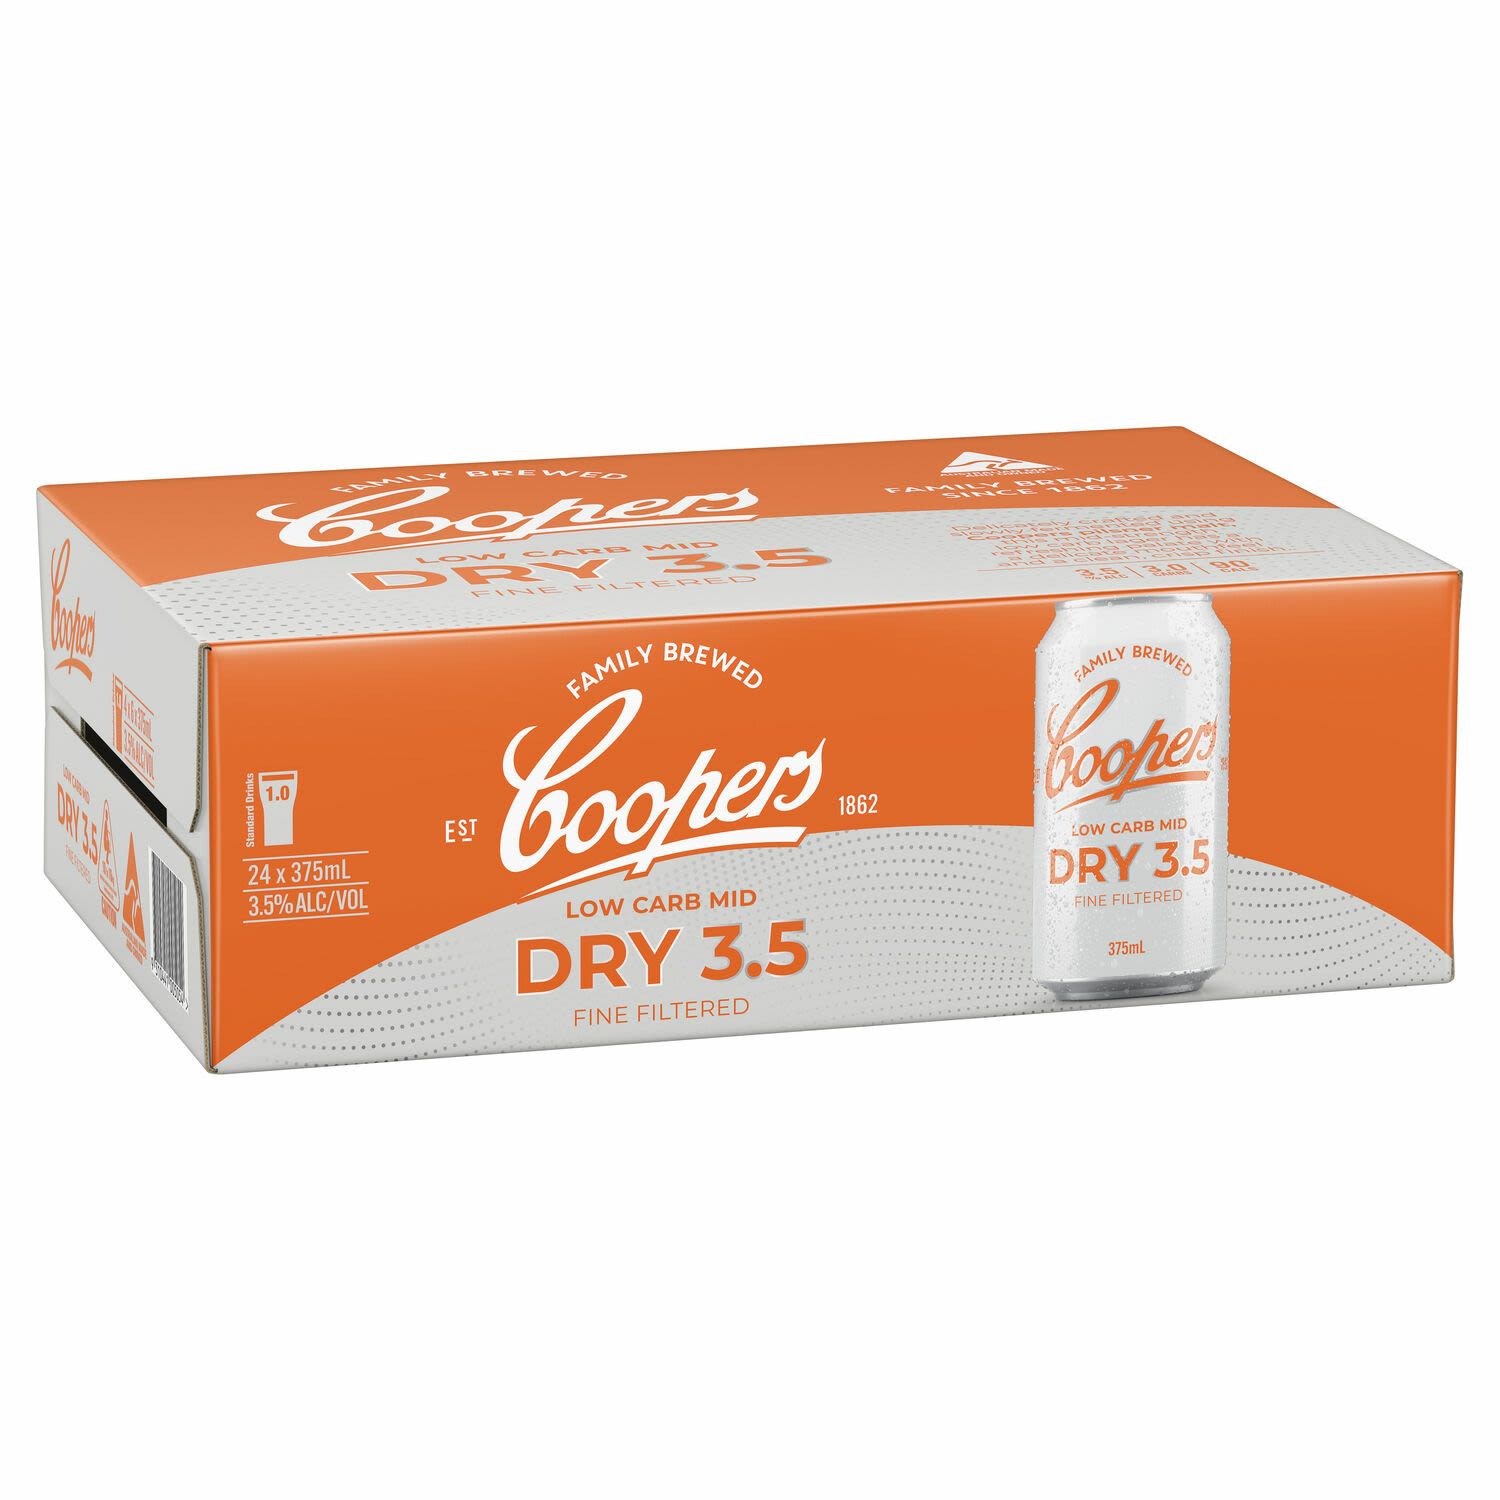 Coopers Dry 3.5% Can 375mL 24 Pack